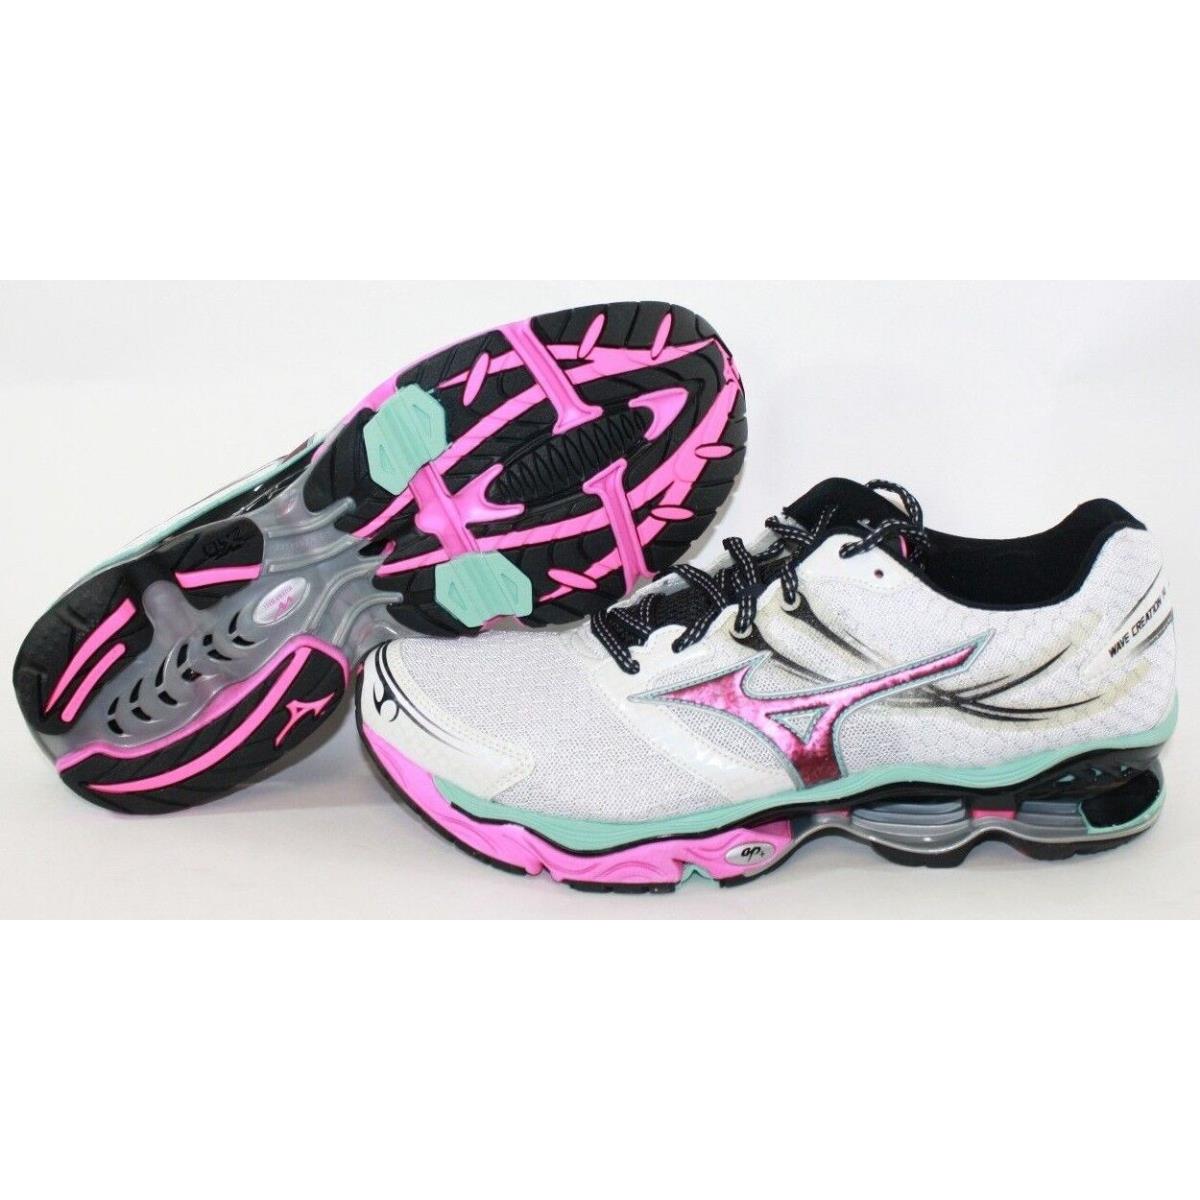 Womens Mizuno Wave Creation 14 White Pink Light Blue Running Sneakers Shoes